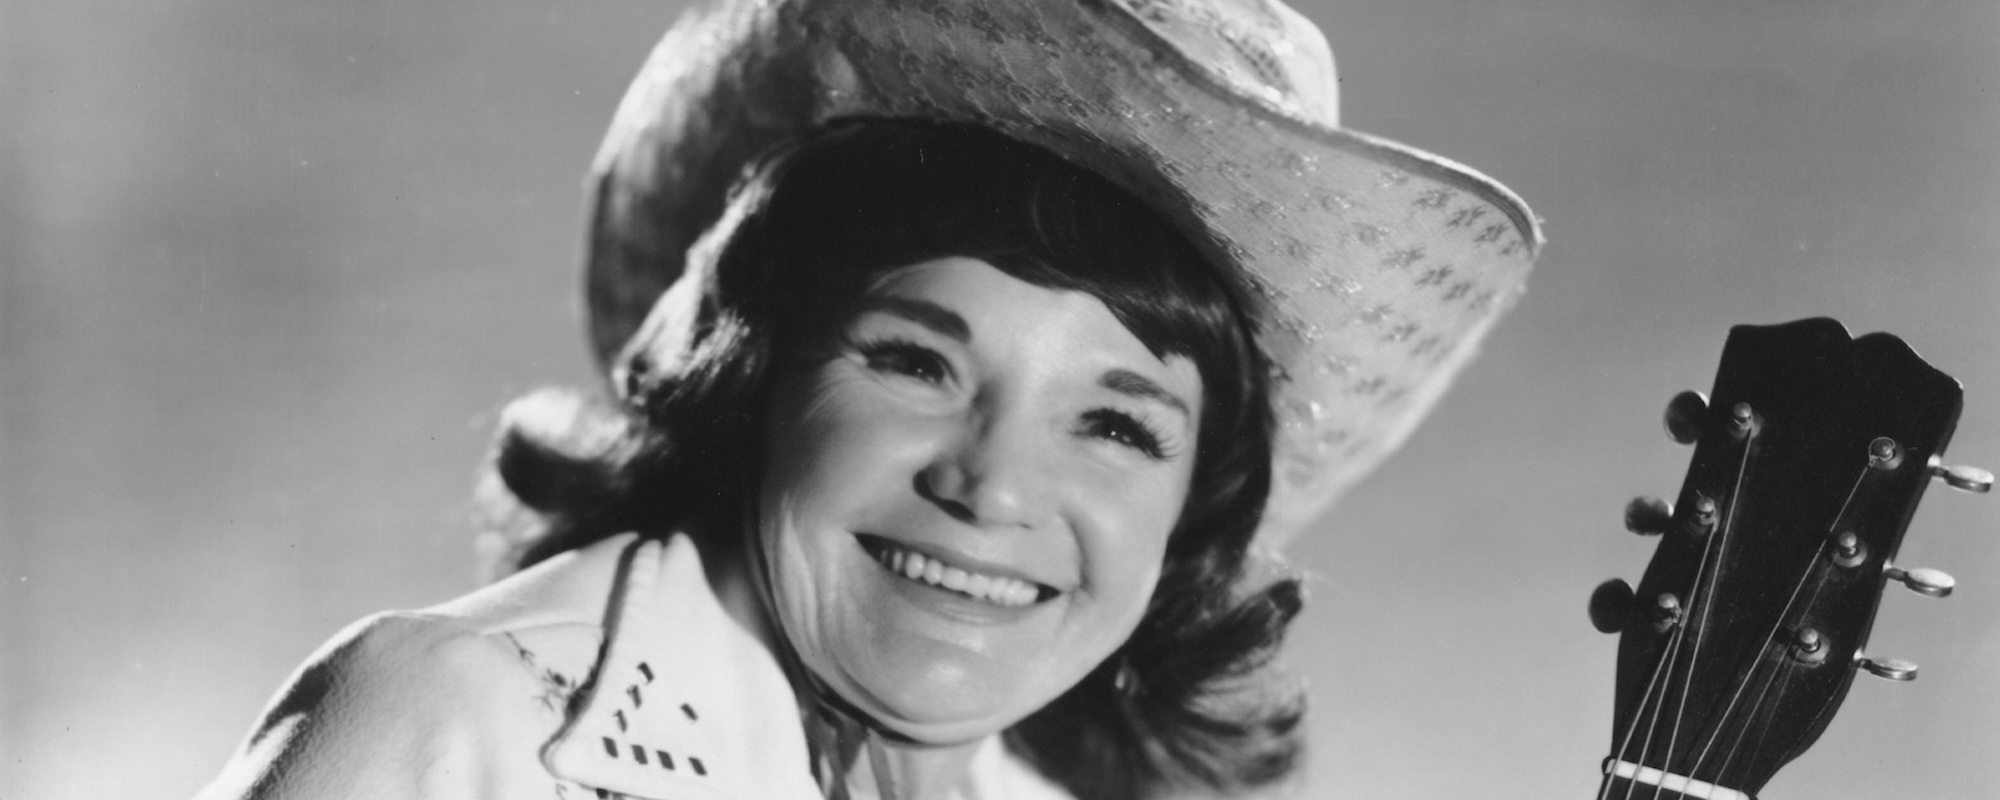 Patsy Montana’s 1935 Hit “I Wanna Be a Cowboy’s Sweetheart” Made Her the First Woman in Country Music to Sell More Than a Million Copies of a Single